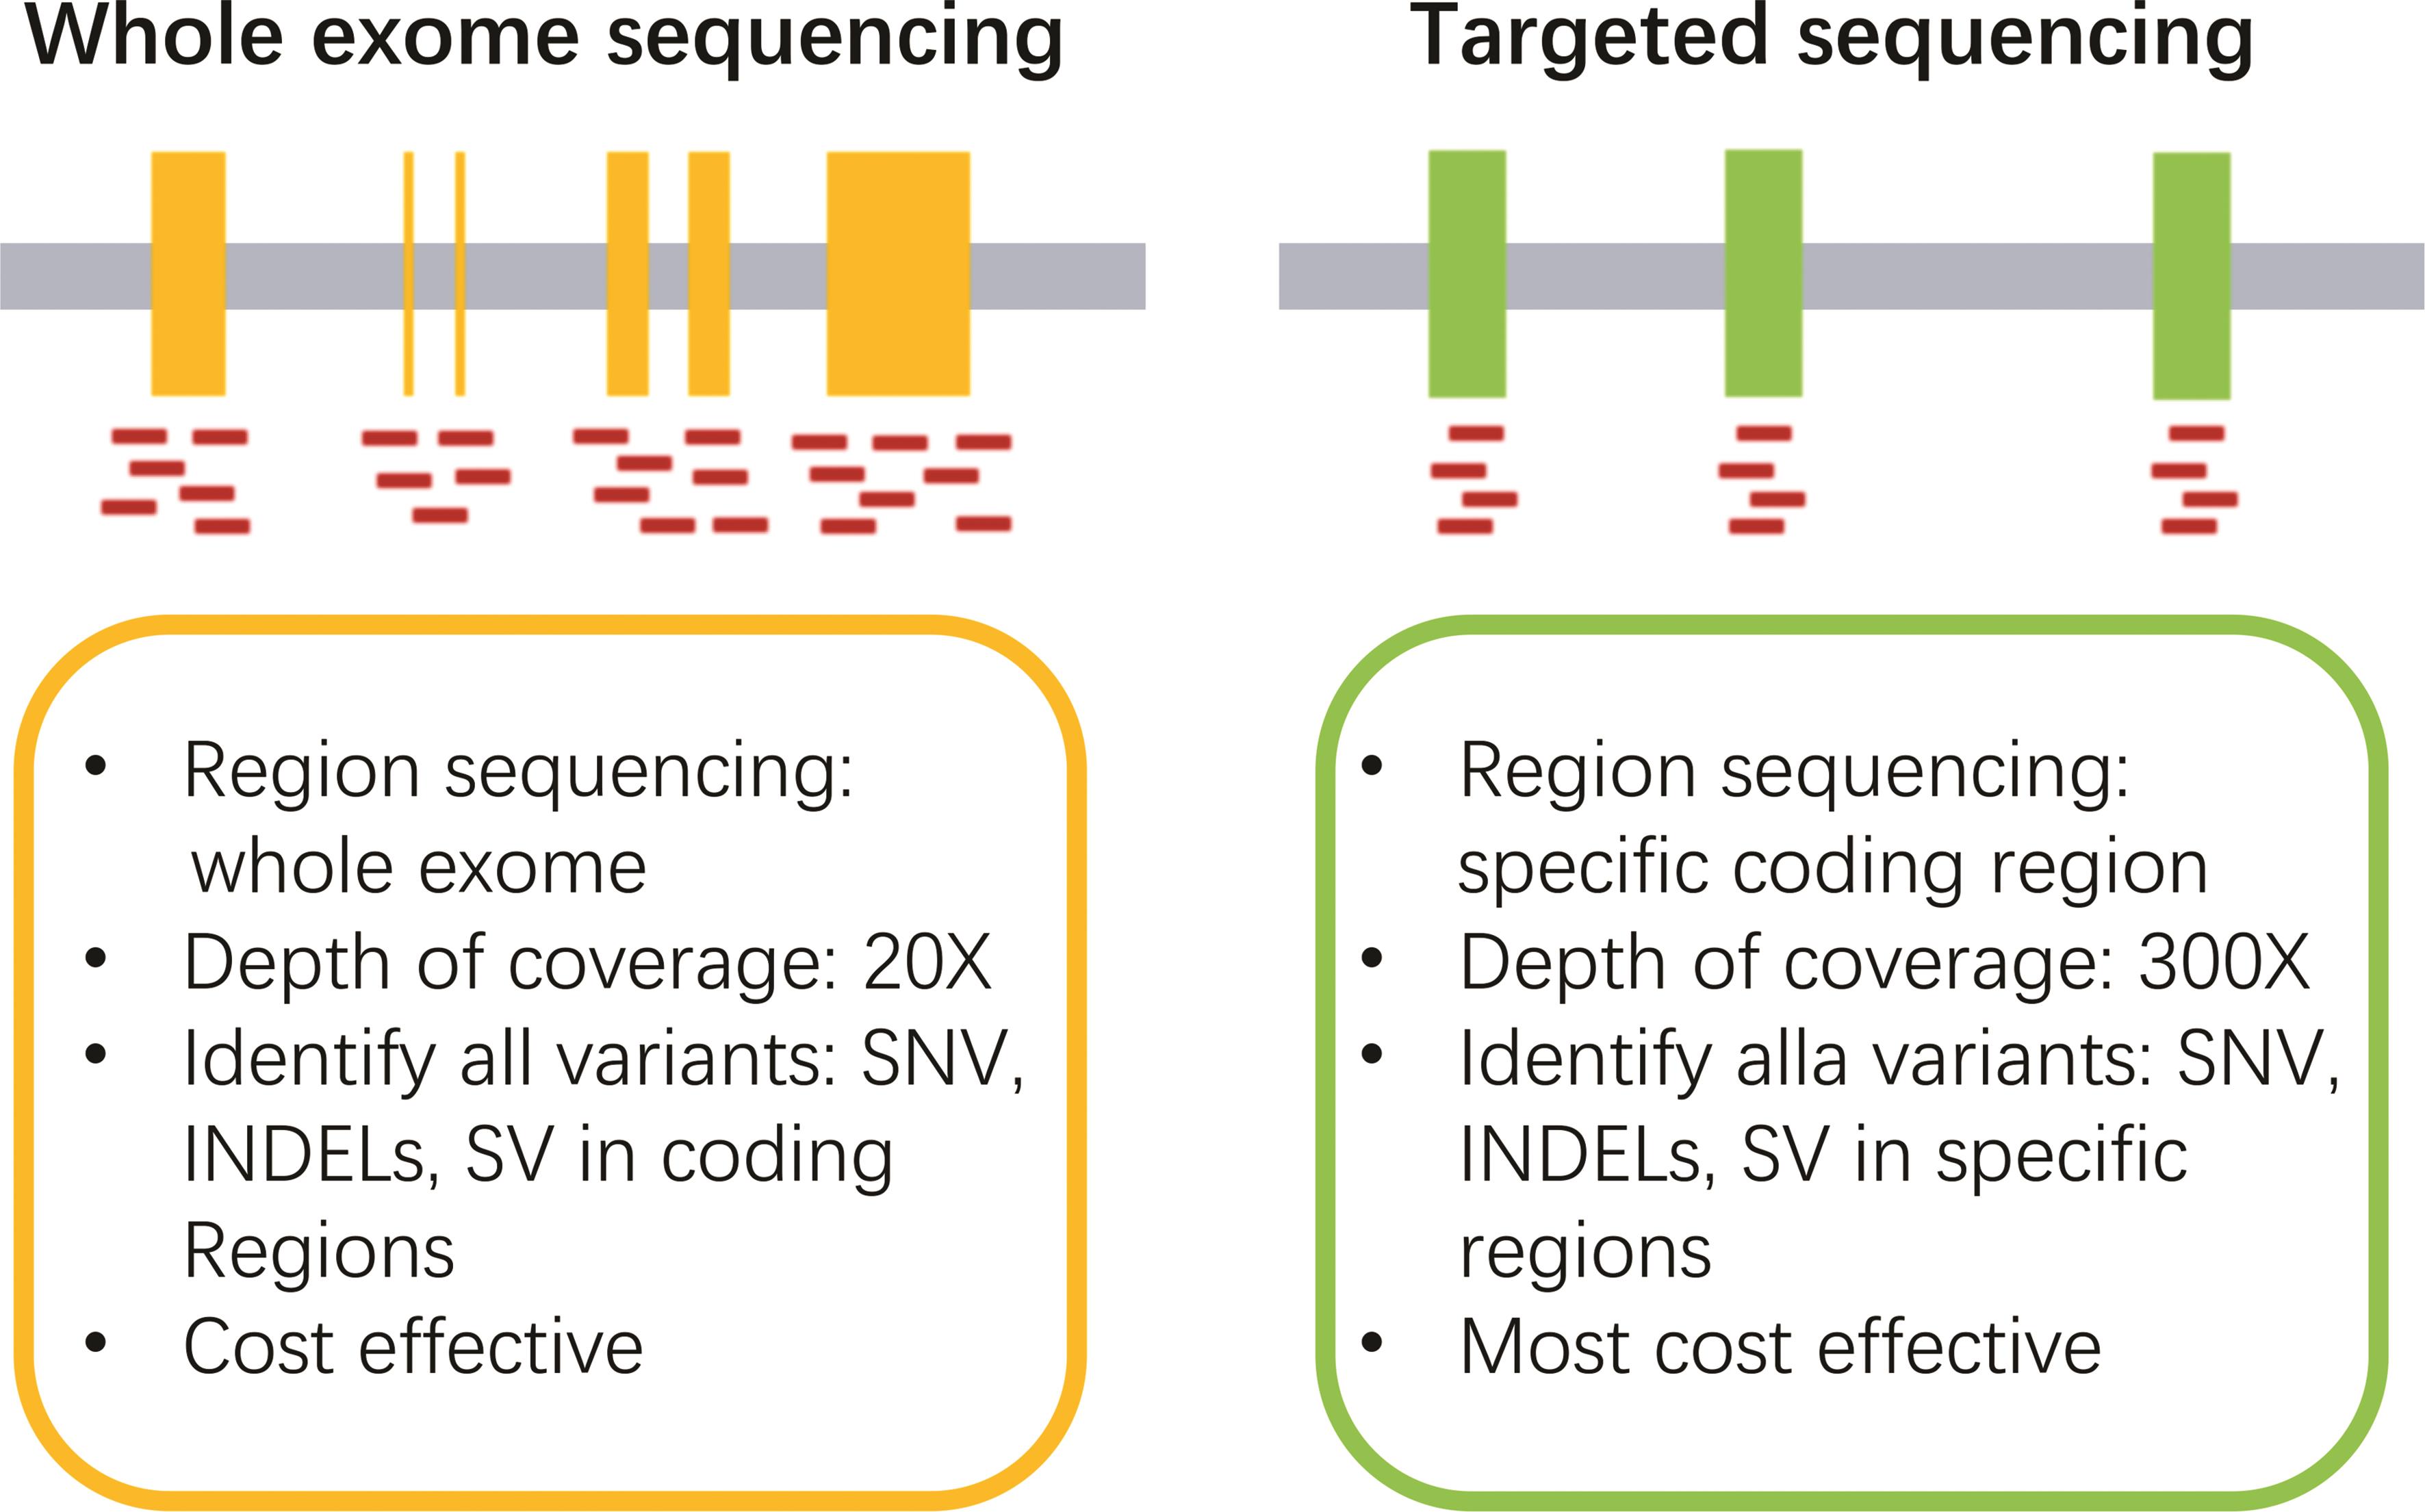 Different properties of WES and Target Sequencing.